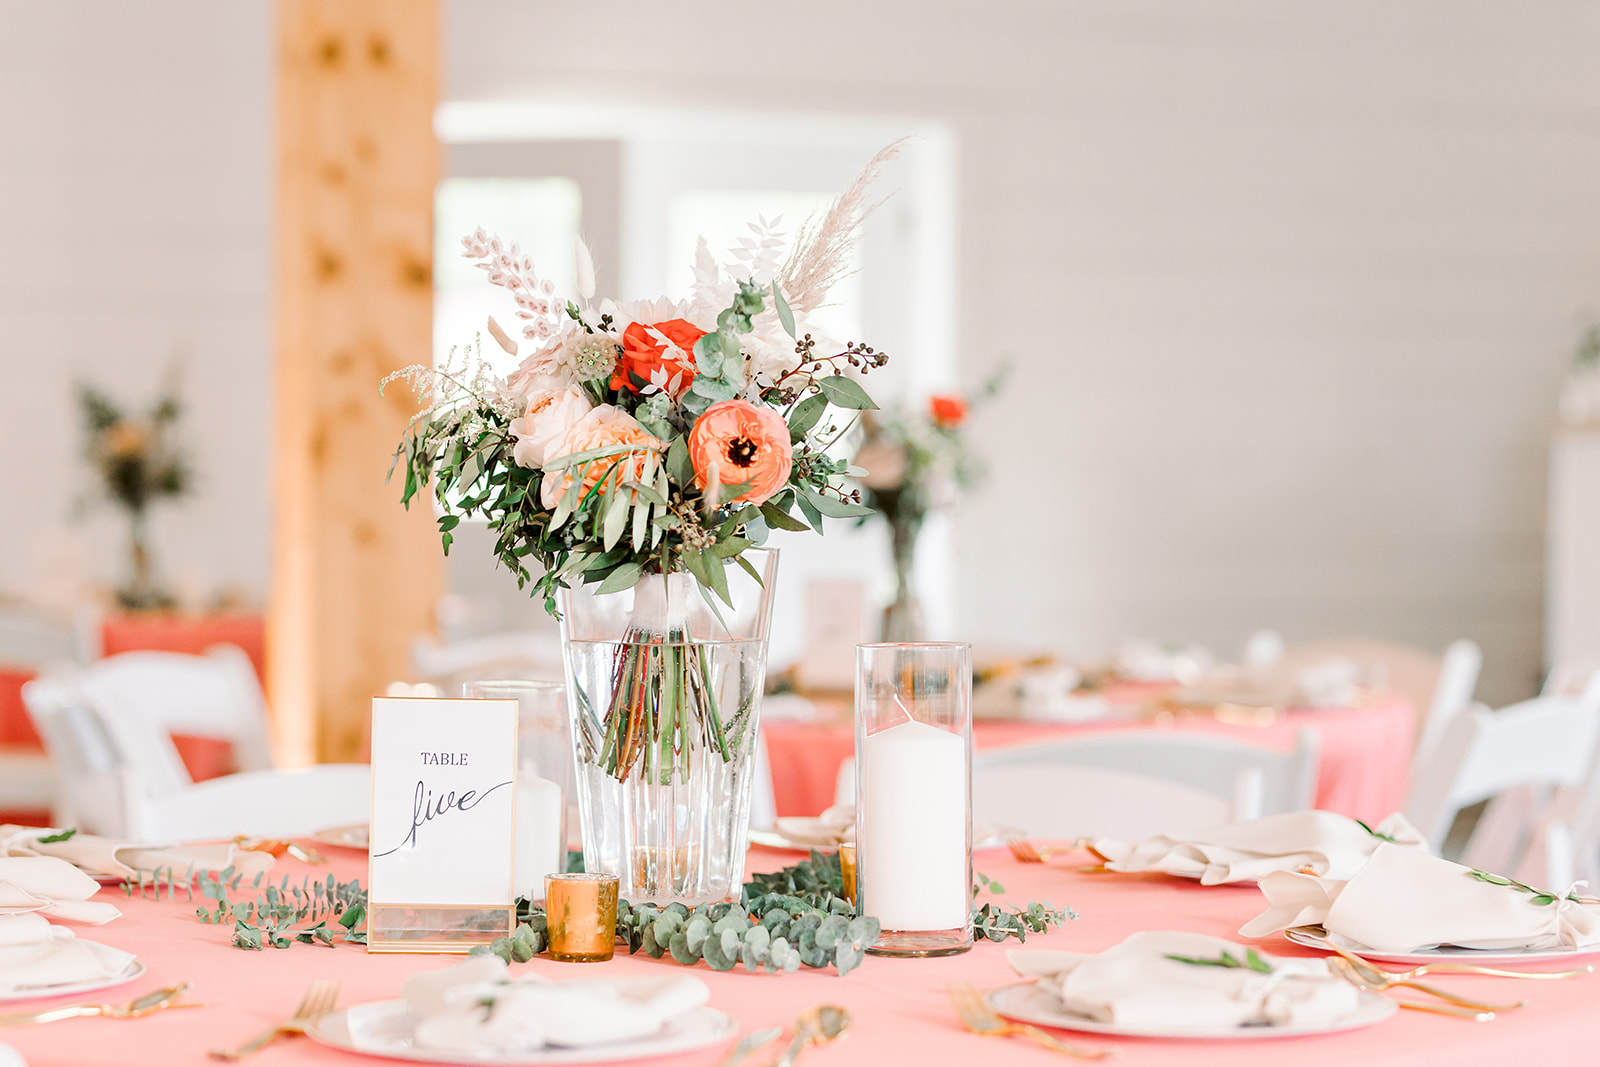 Wedding table decor with bright colors and boho vibes